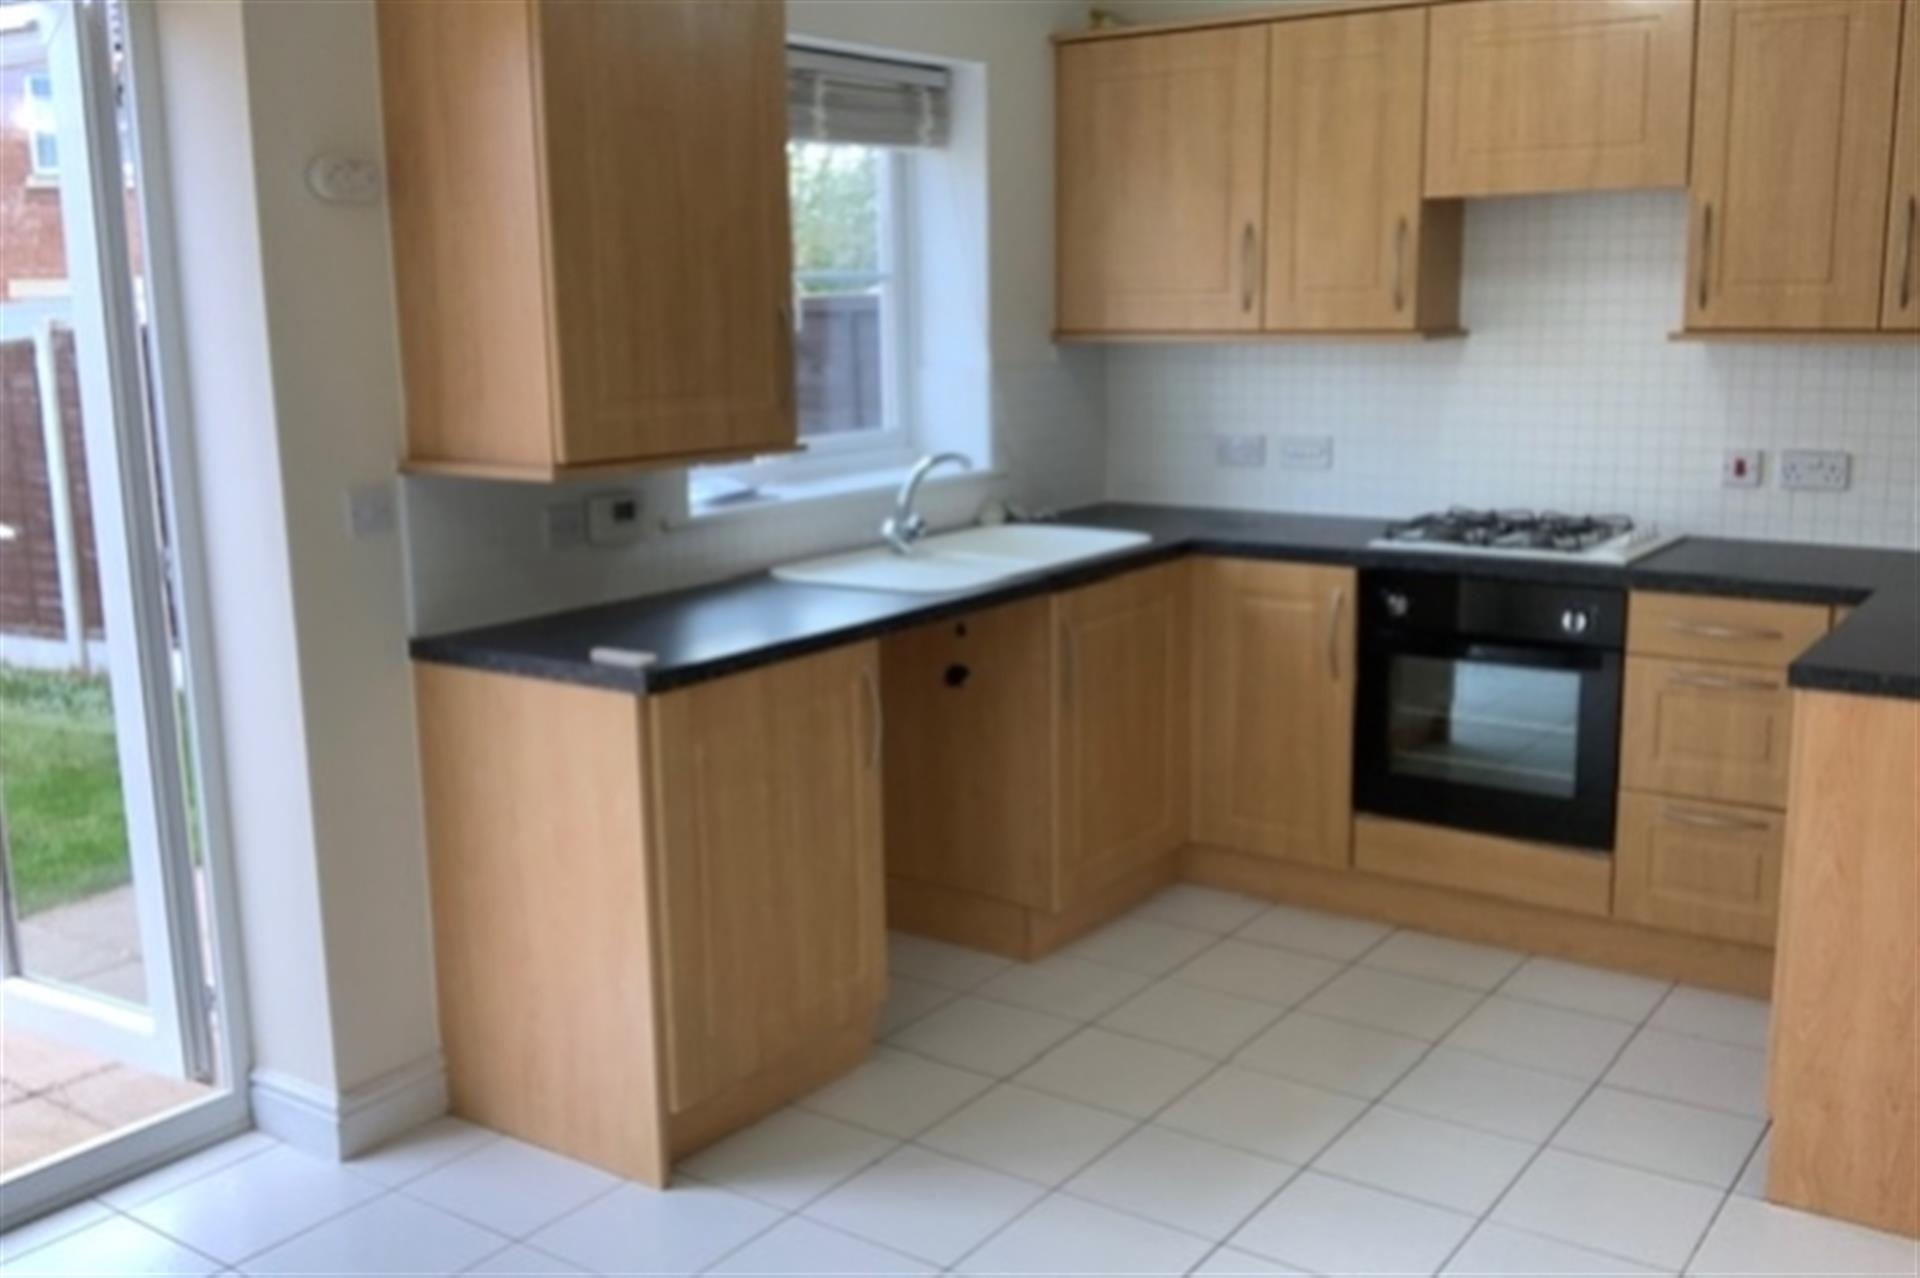 3 Bed Terraced House To Rent - 19 Roundthorn kitchen